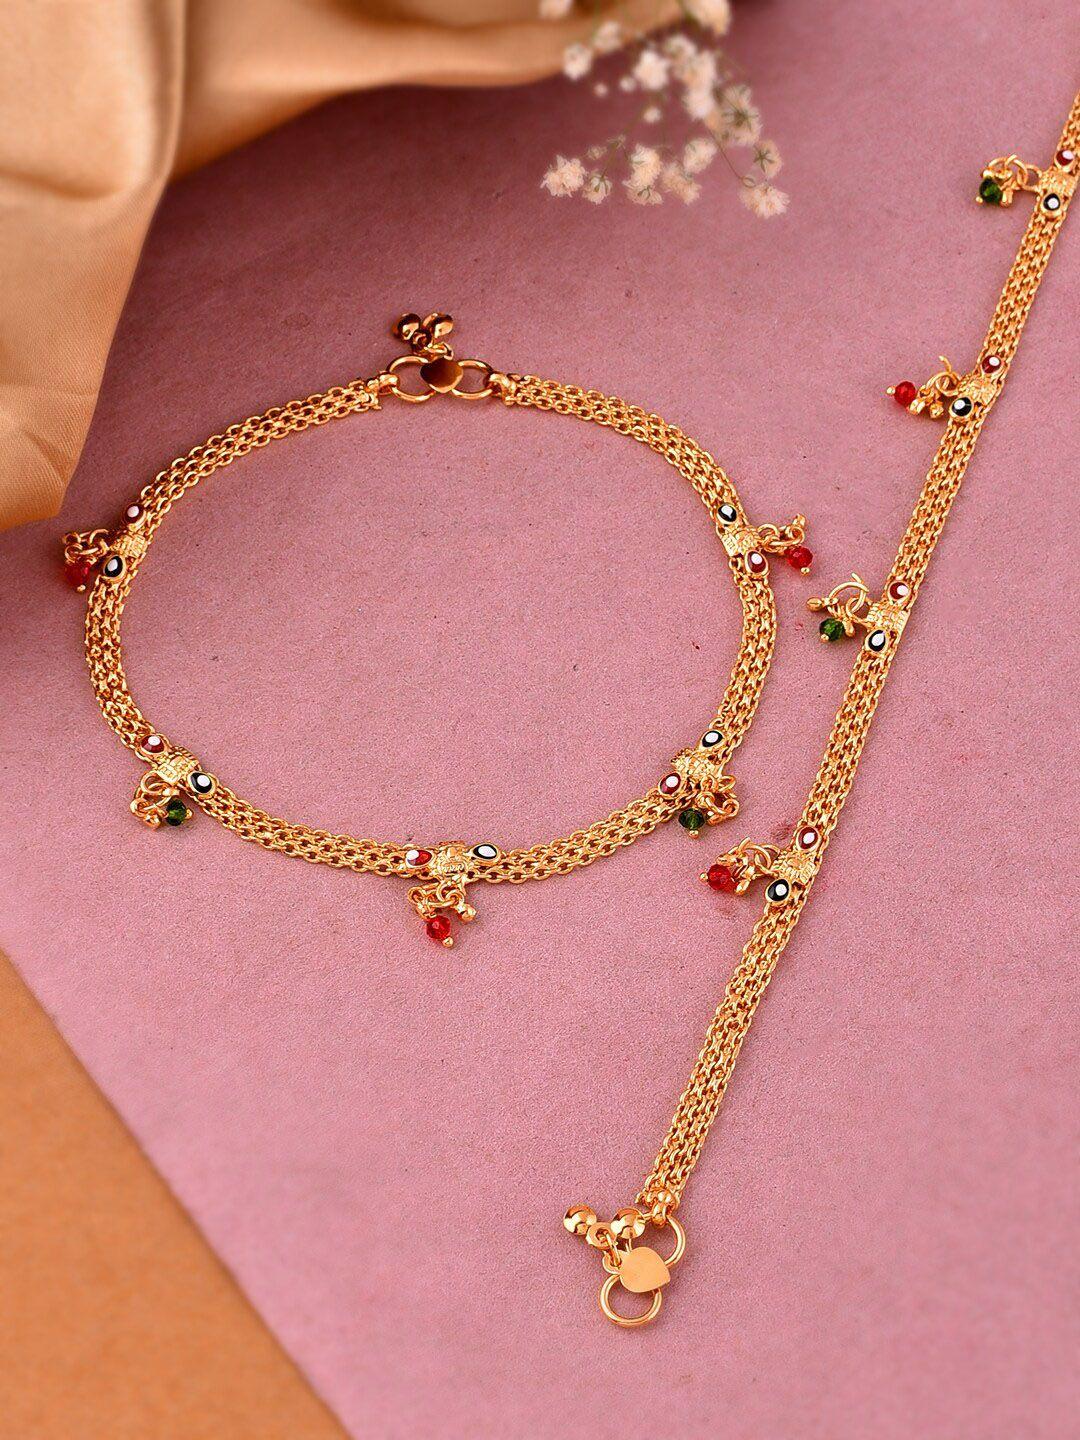 silvermerc designs gold-plated artificial beads enamelled anklets